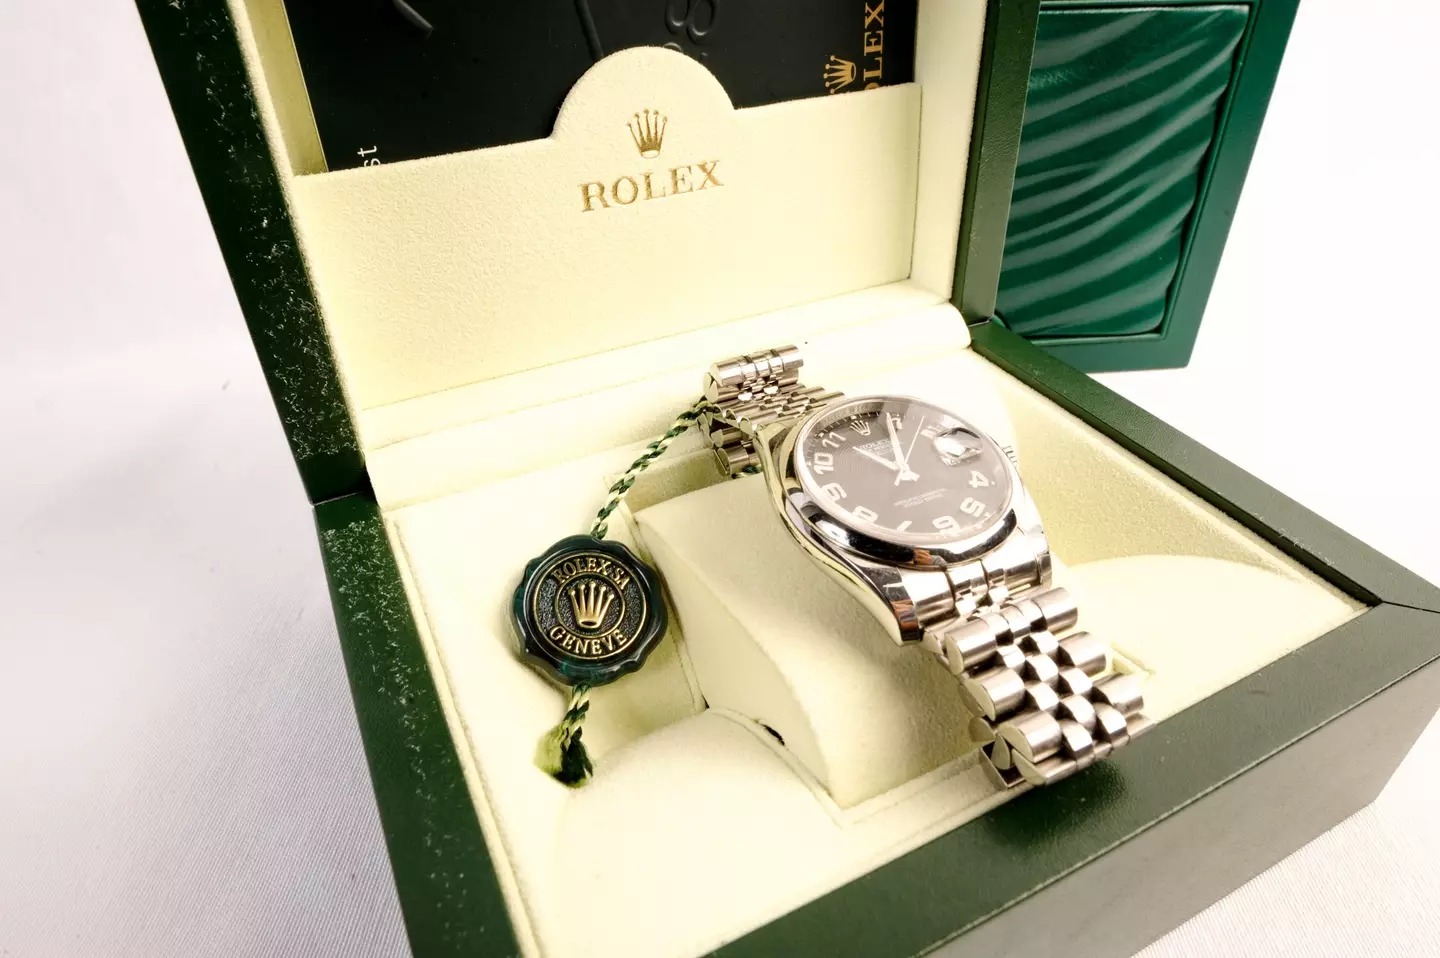 A rolex watch was reportedly among the many luxurious purchases Price fraudulently made.